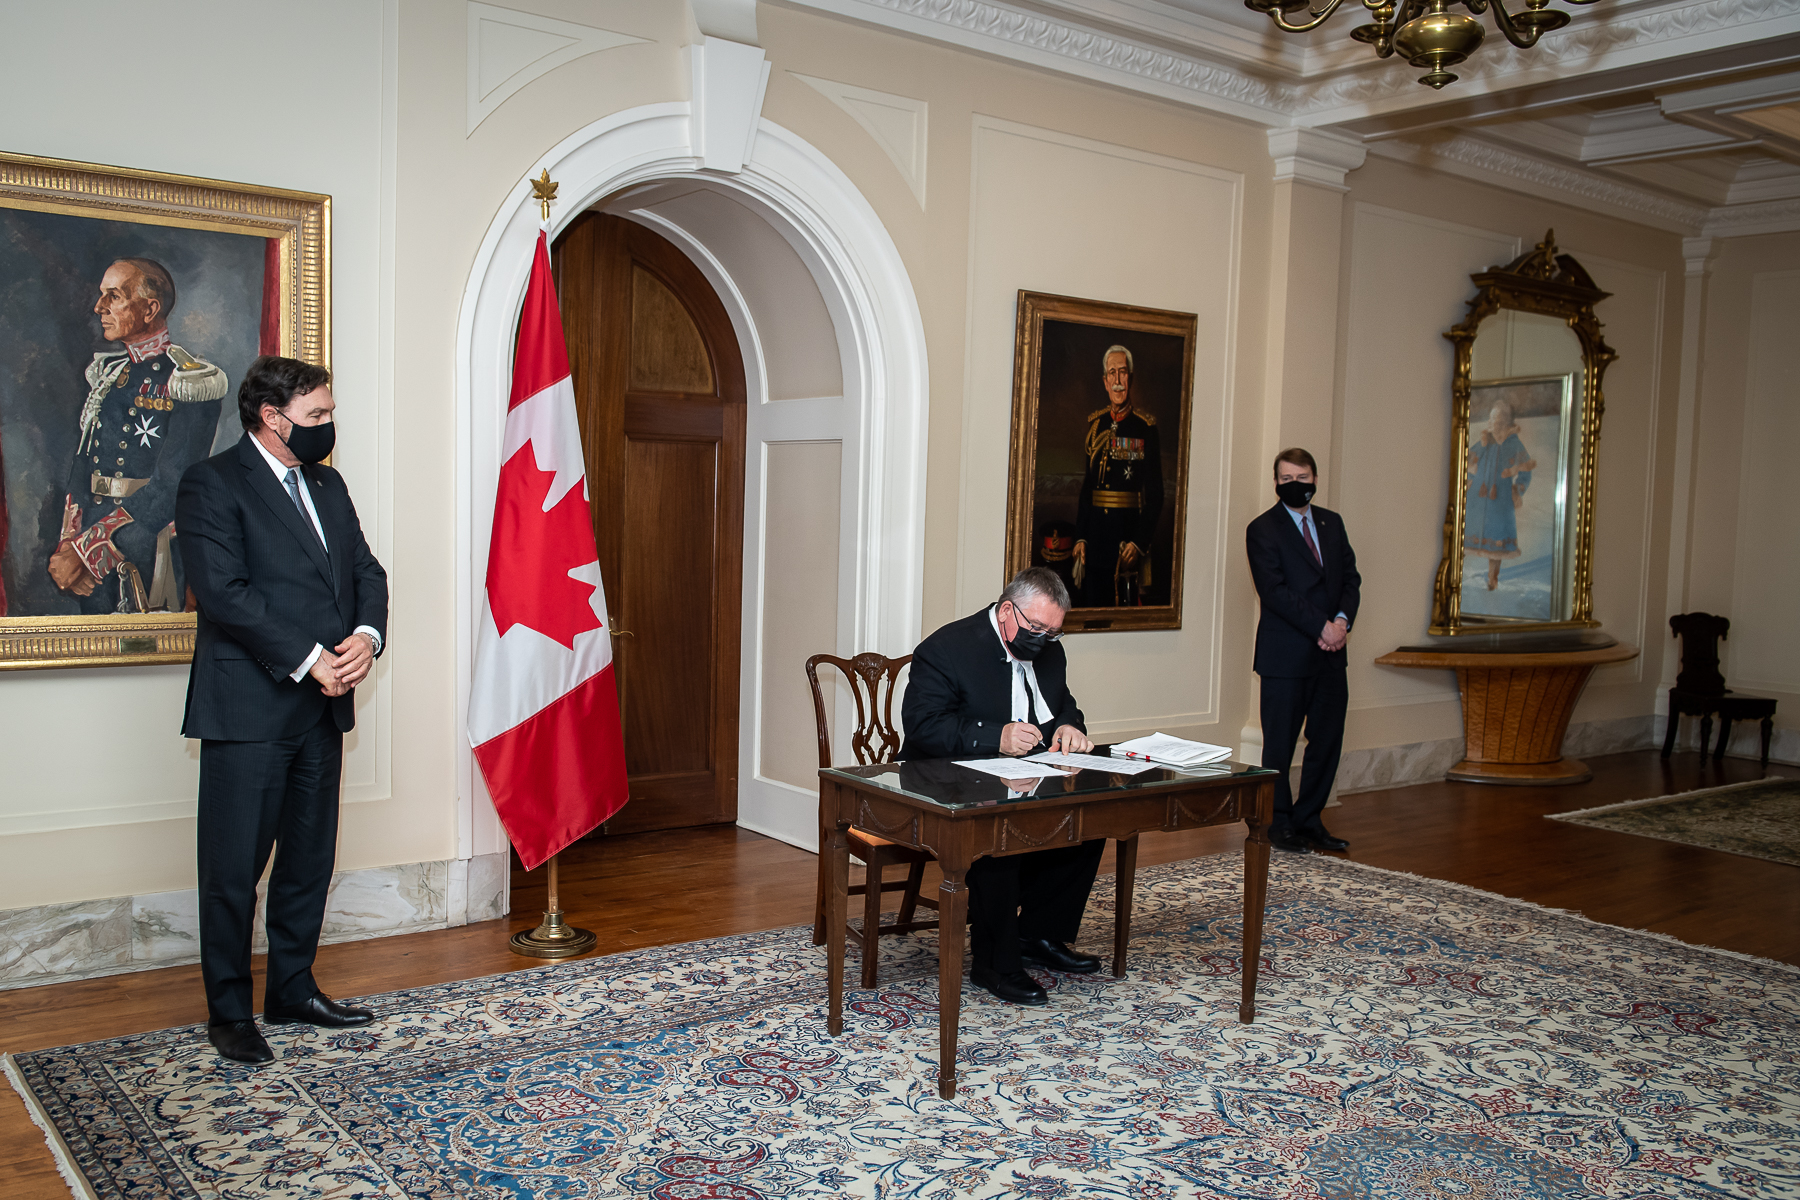 Royal Assent Ceremony The Governor General of Canada